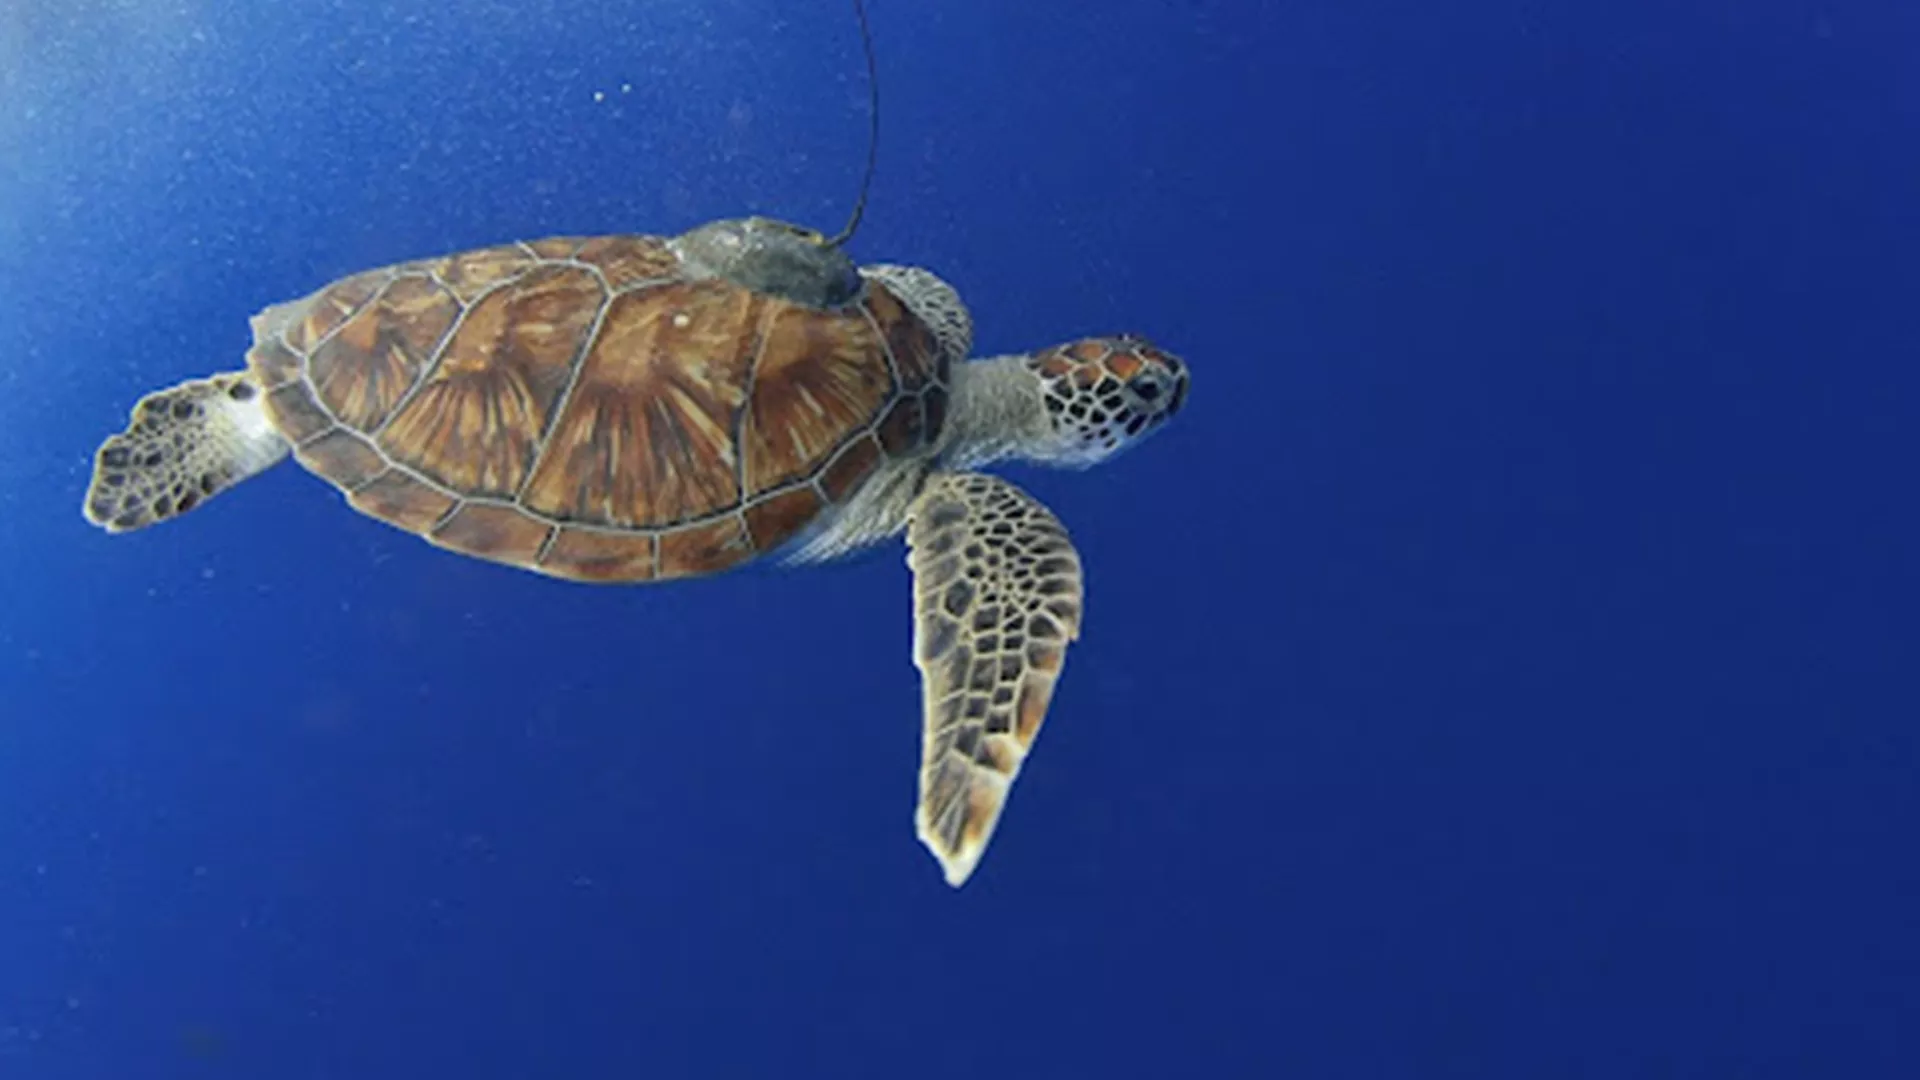 Image of a turtle in the water